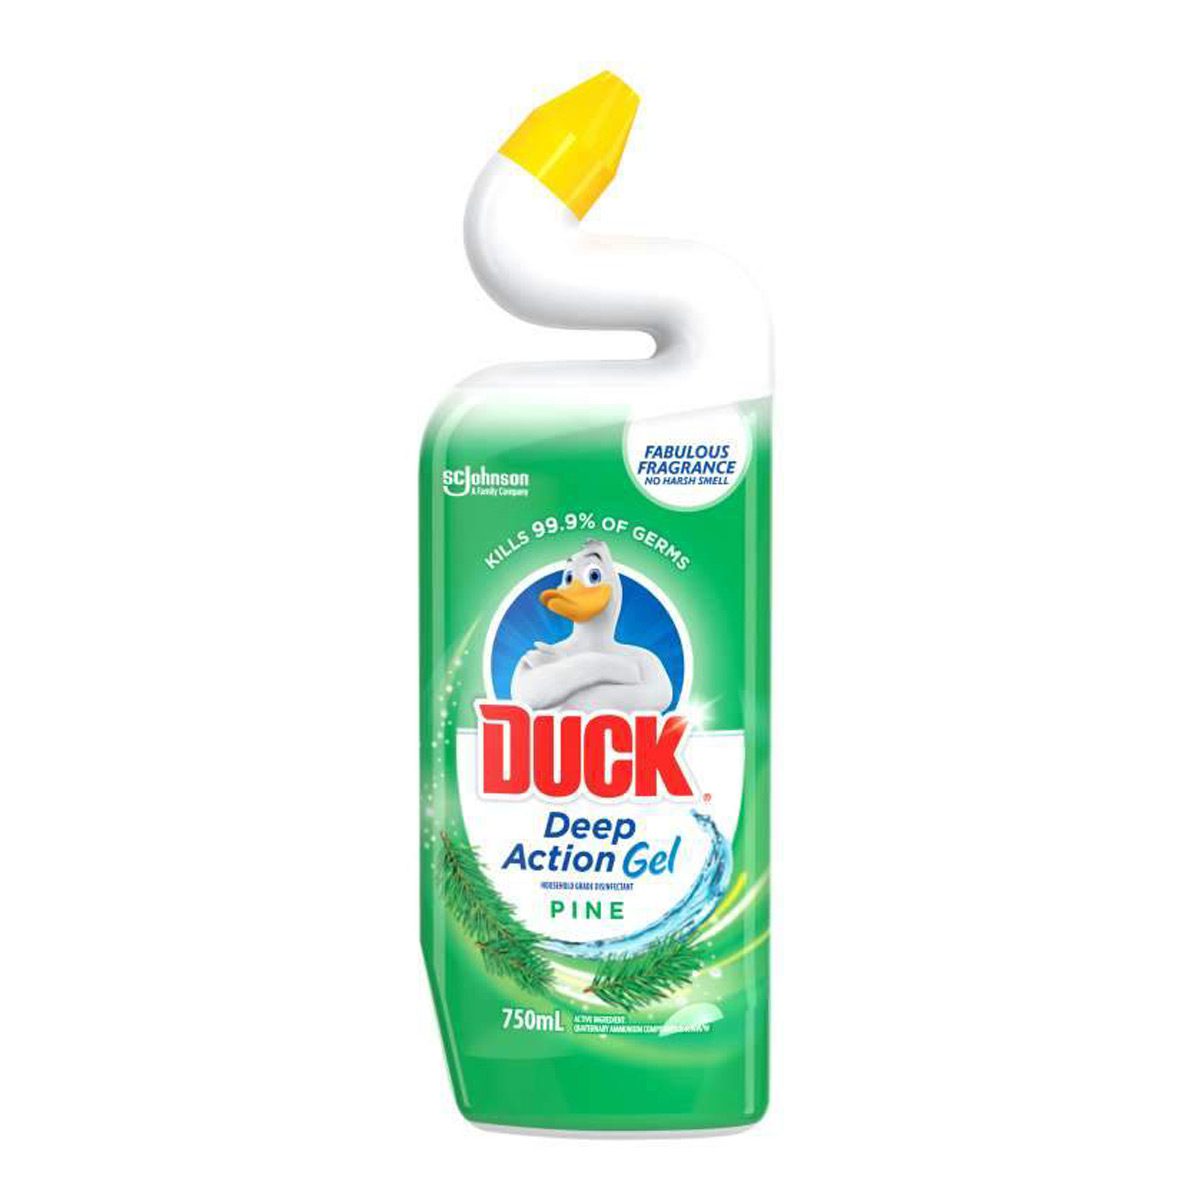 cleaning-products-washroom—toilet-duck-pine-750ml-deep-action-gel-reaches-hidden-germs-grime-under-the-rim-vjs-distributors-323019